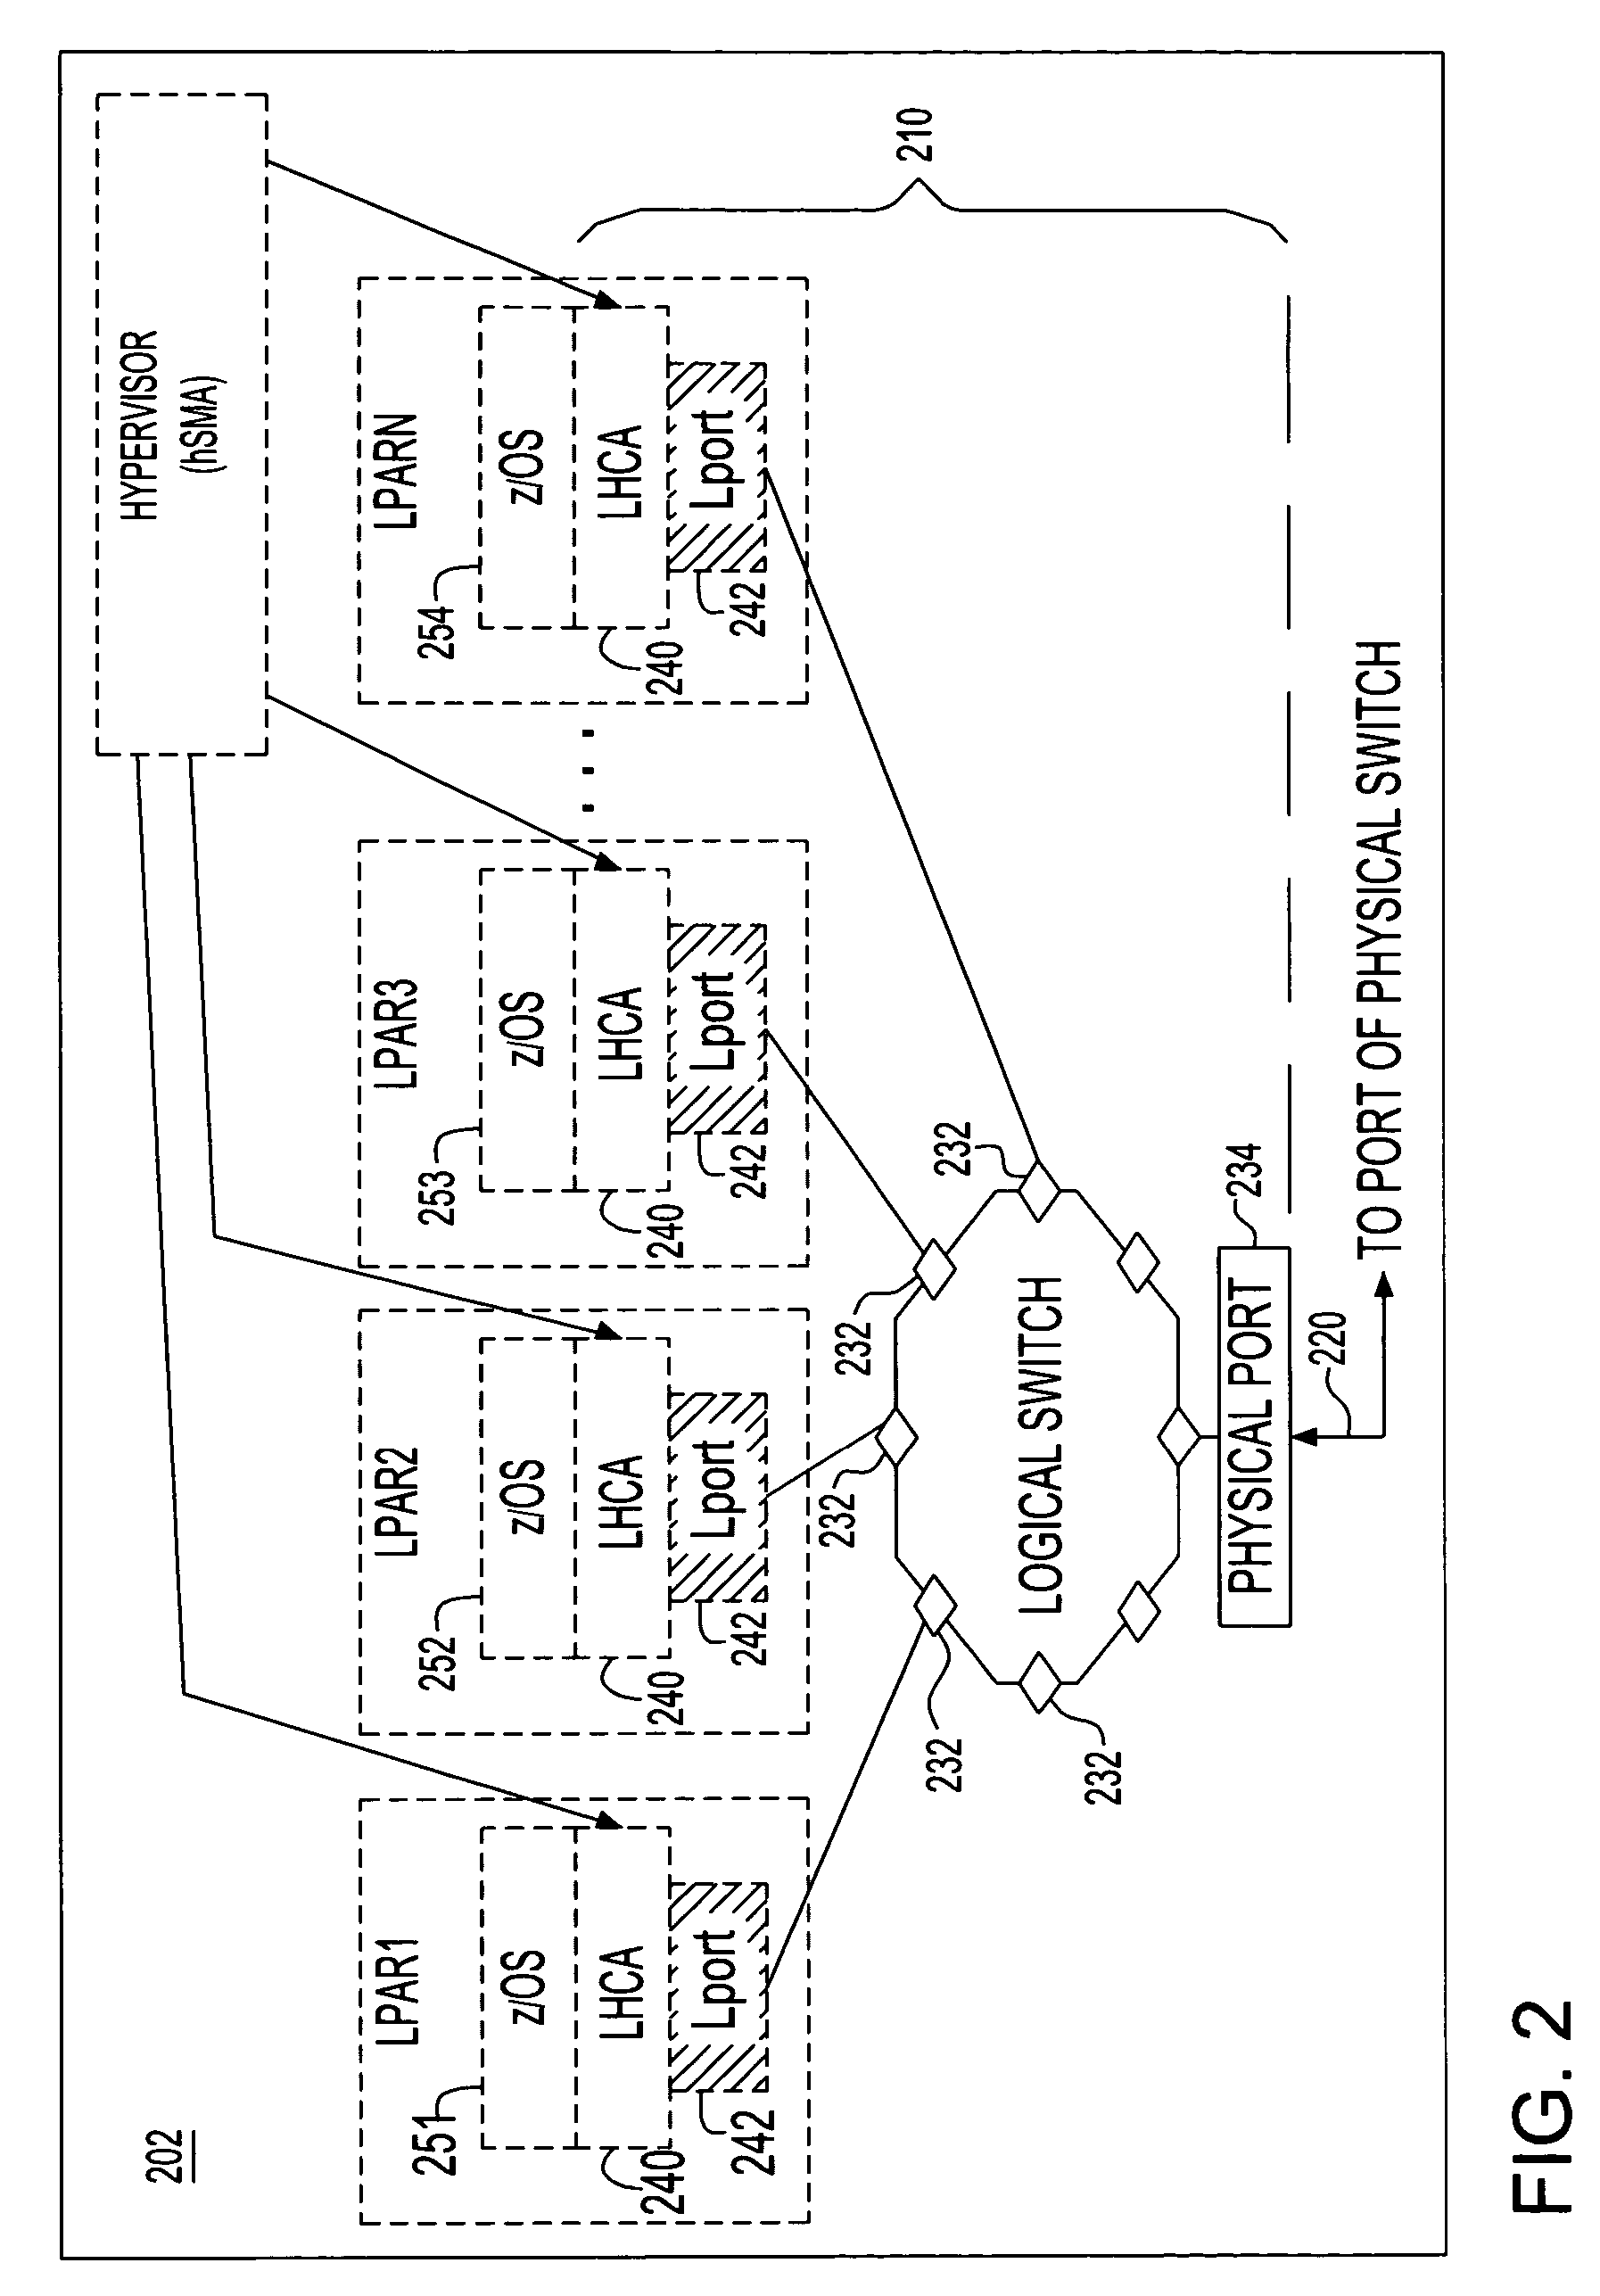 System and method for providing multiple virtual host channel adapters using virtual switches